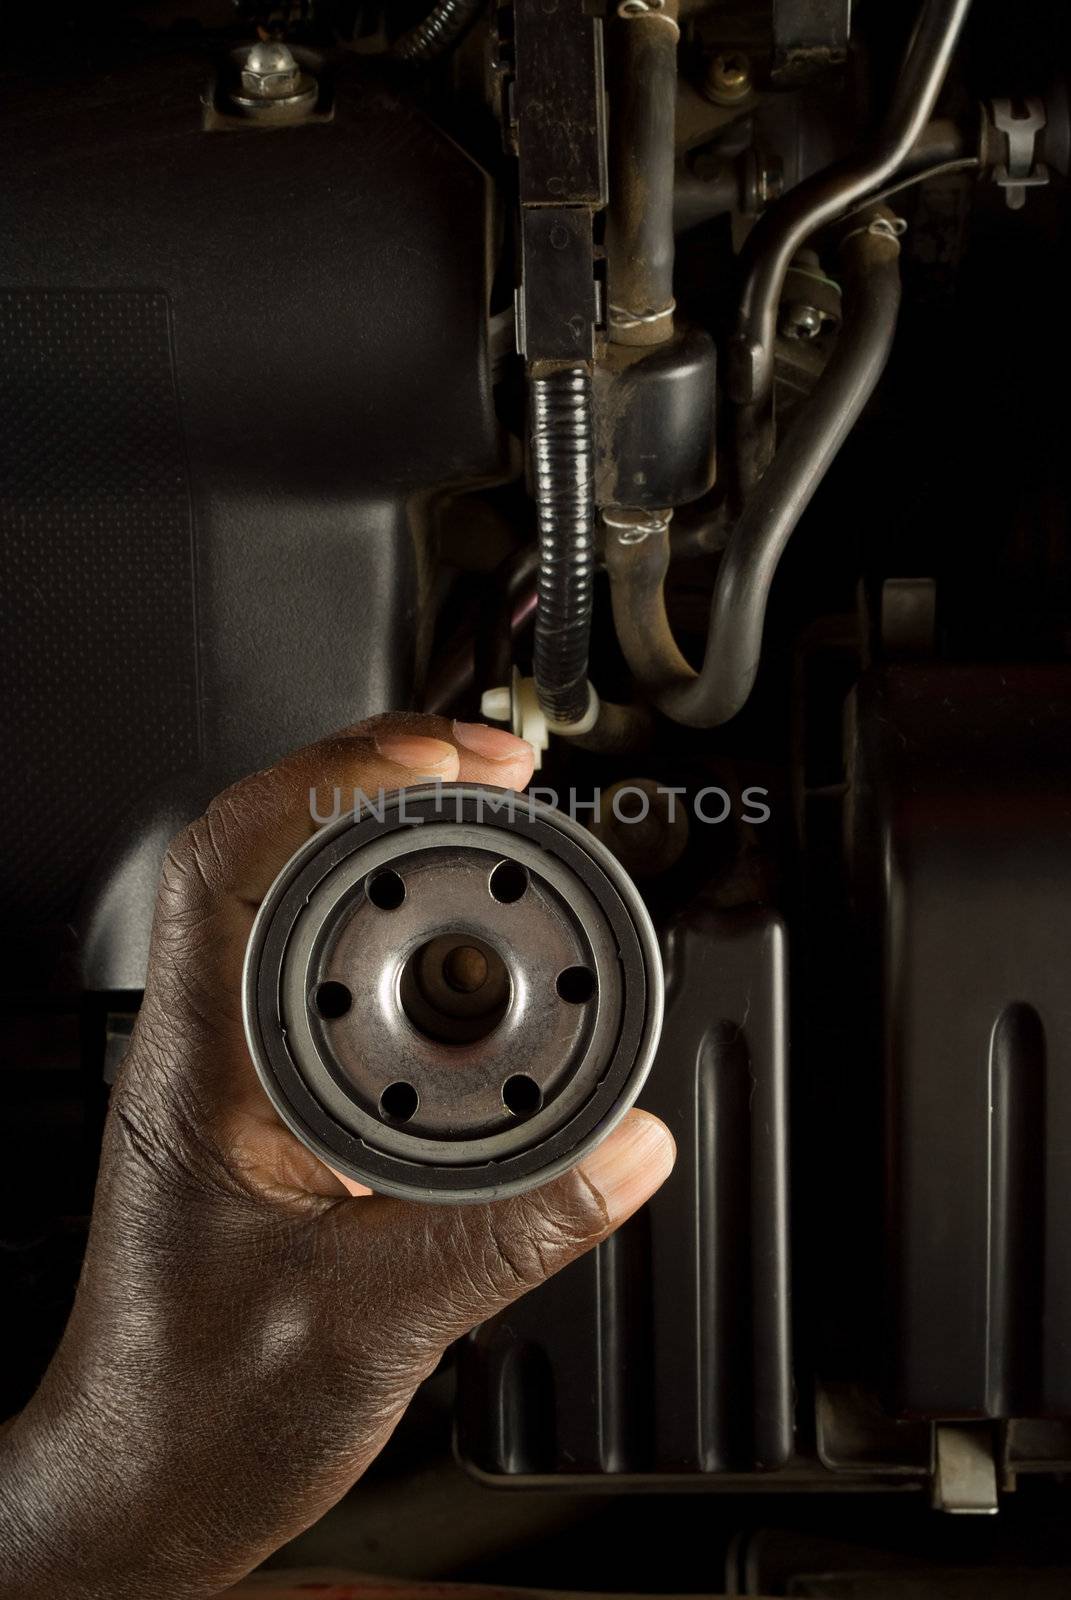 South African or American hand holding oil filter with modern car engine background